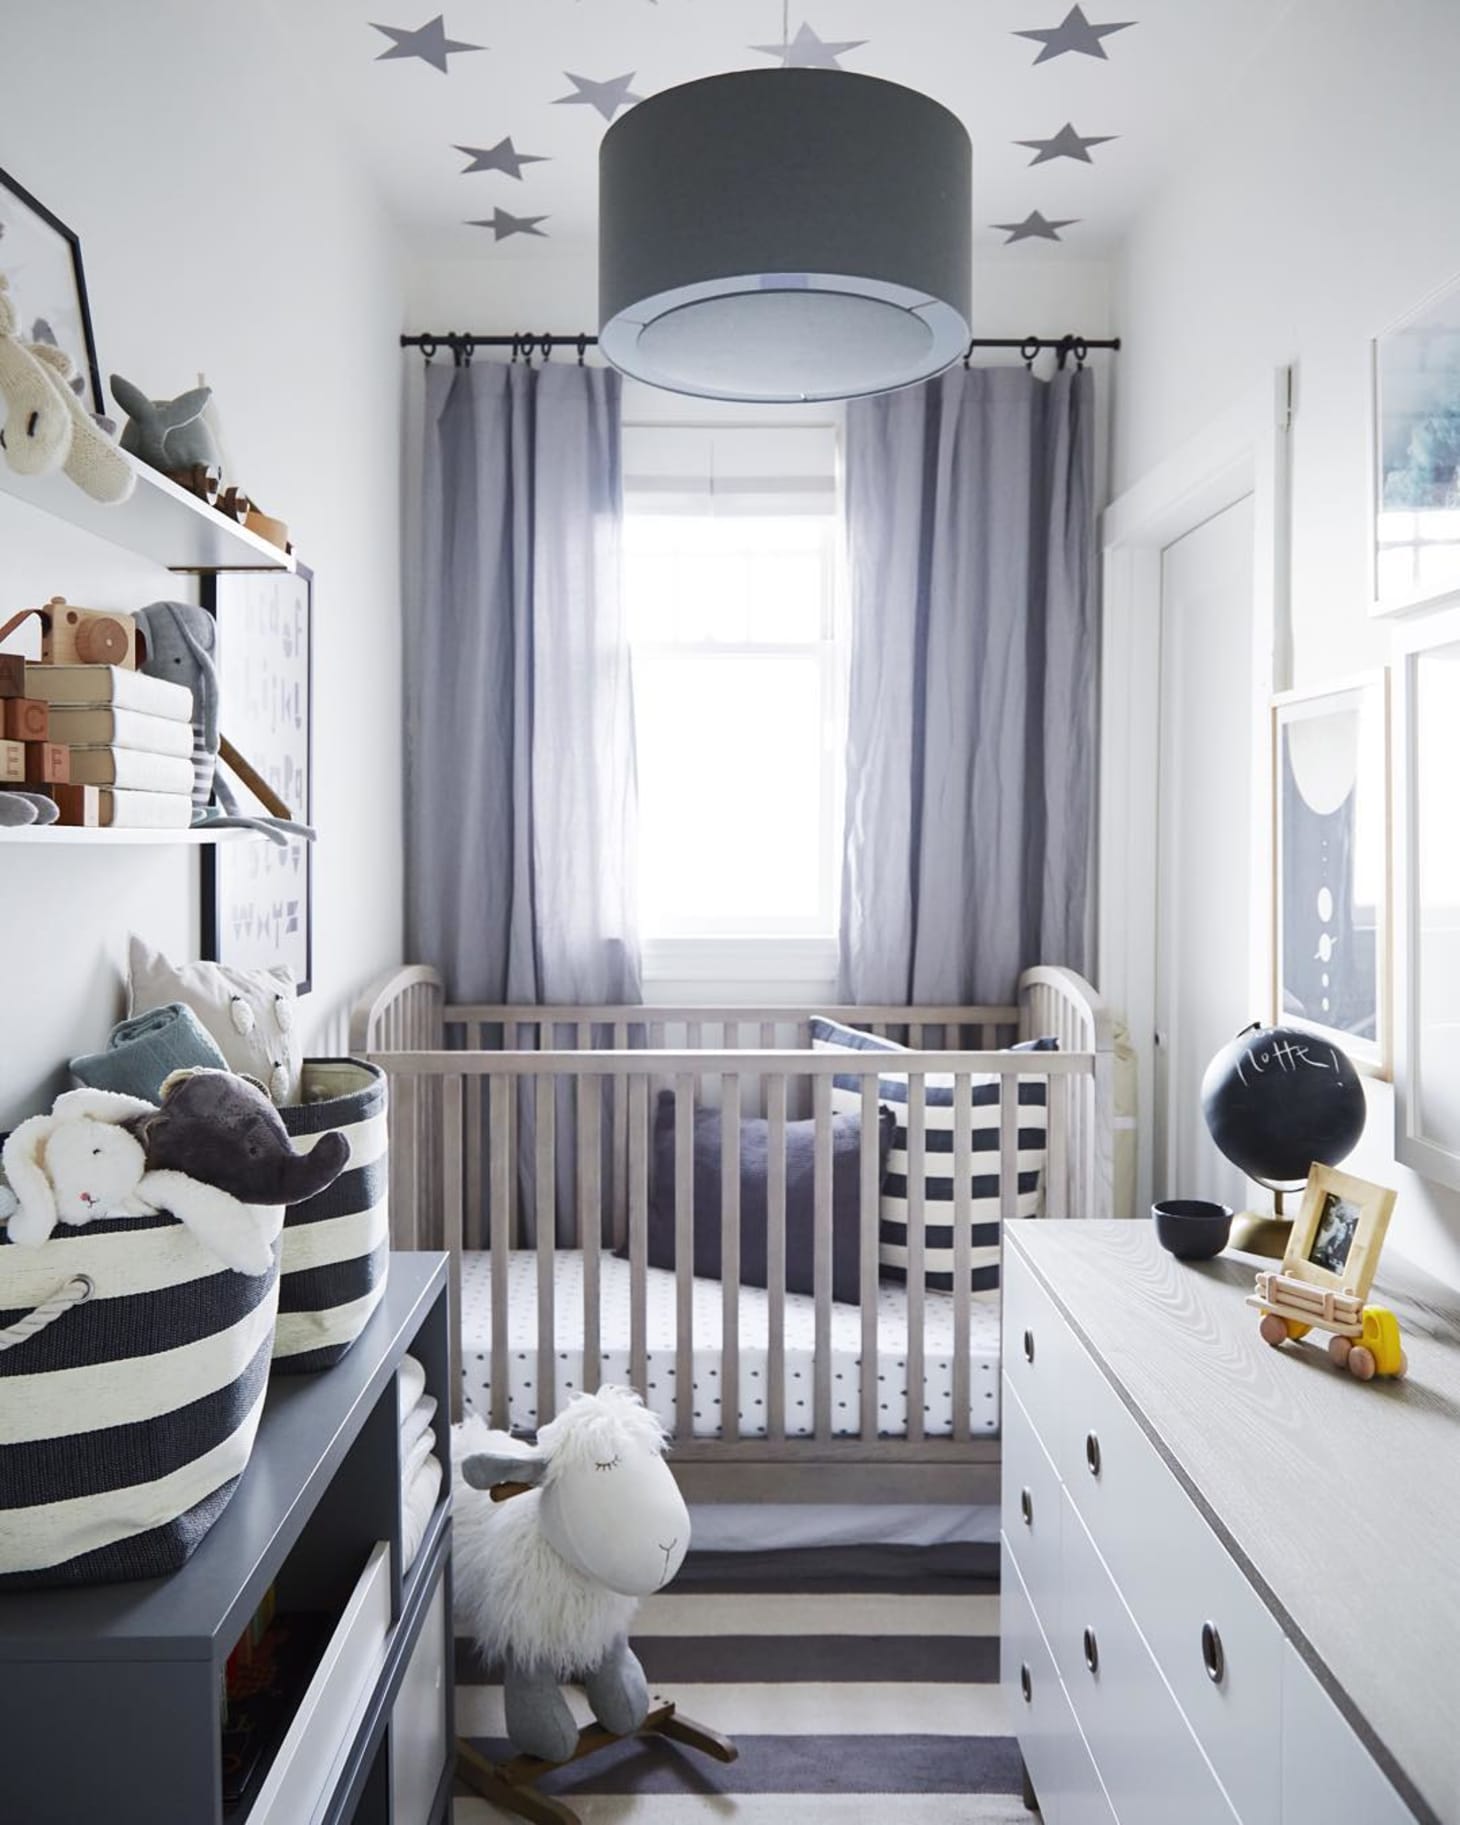 How To Fit A Nursery Into Your Very Small Space Apartment Therapy